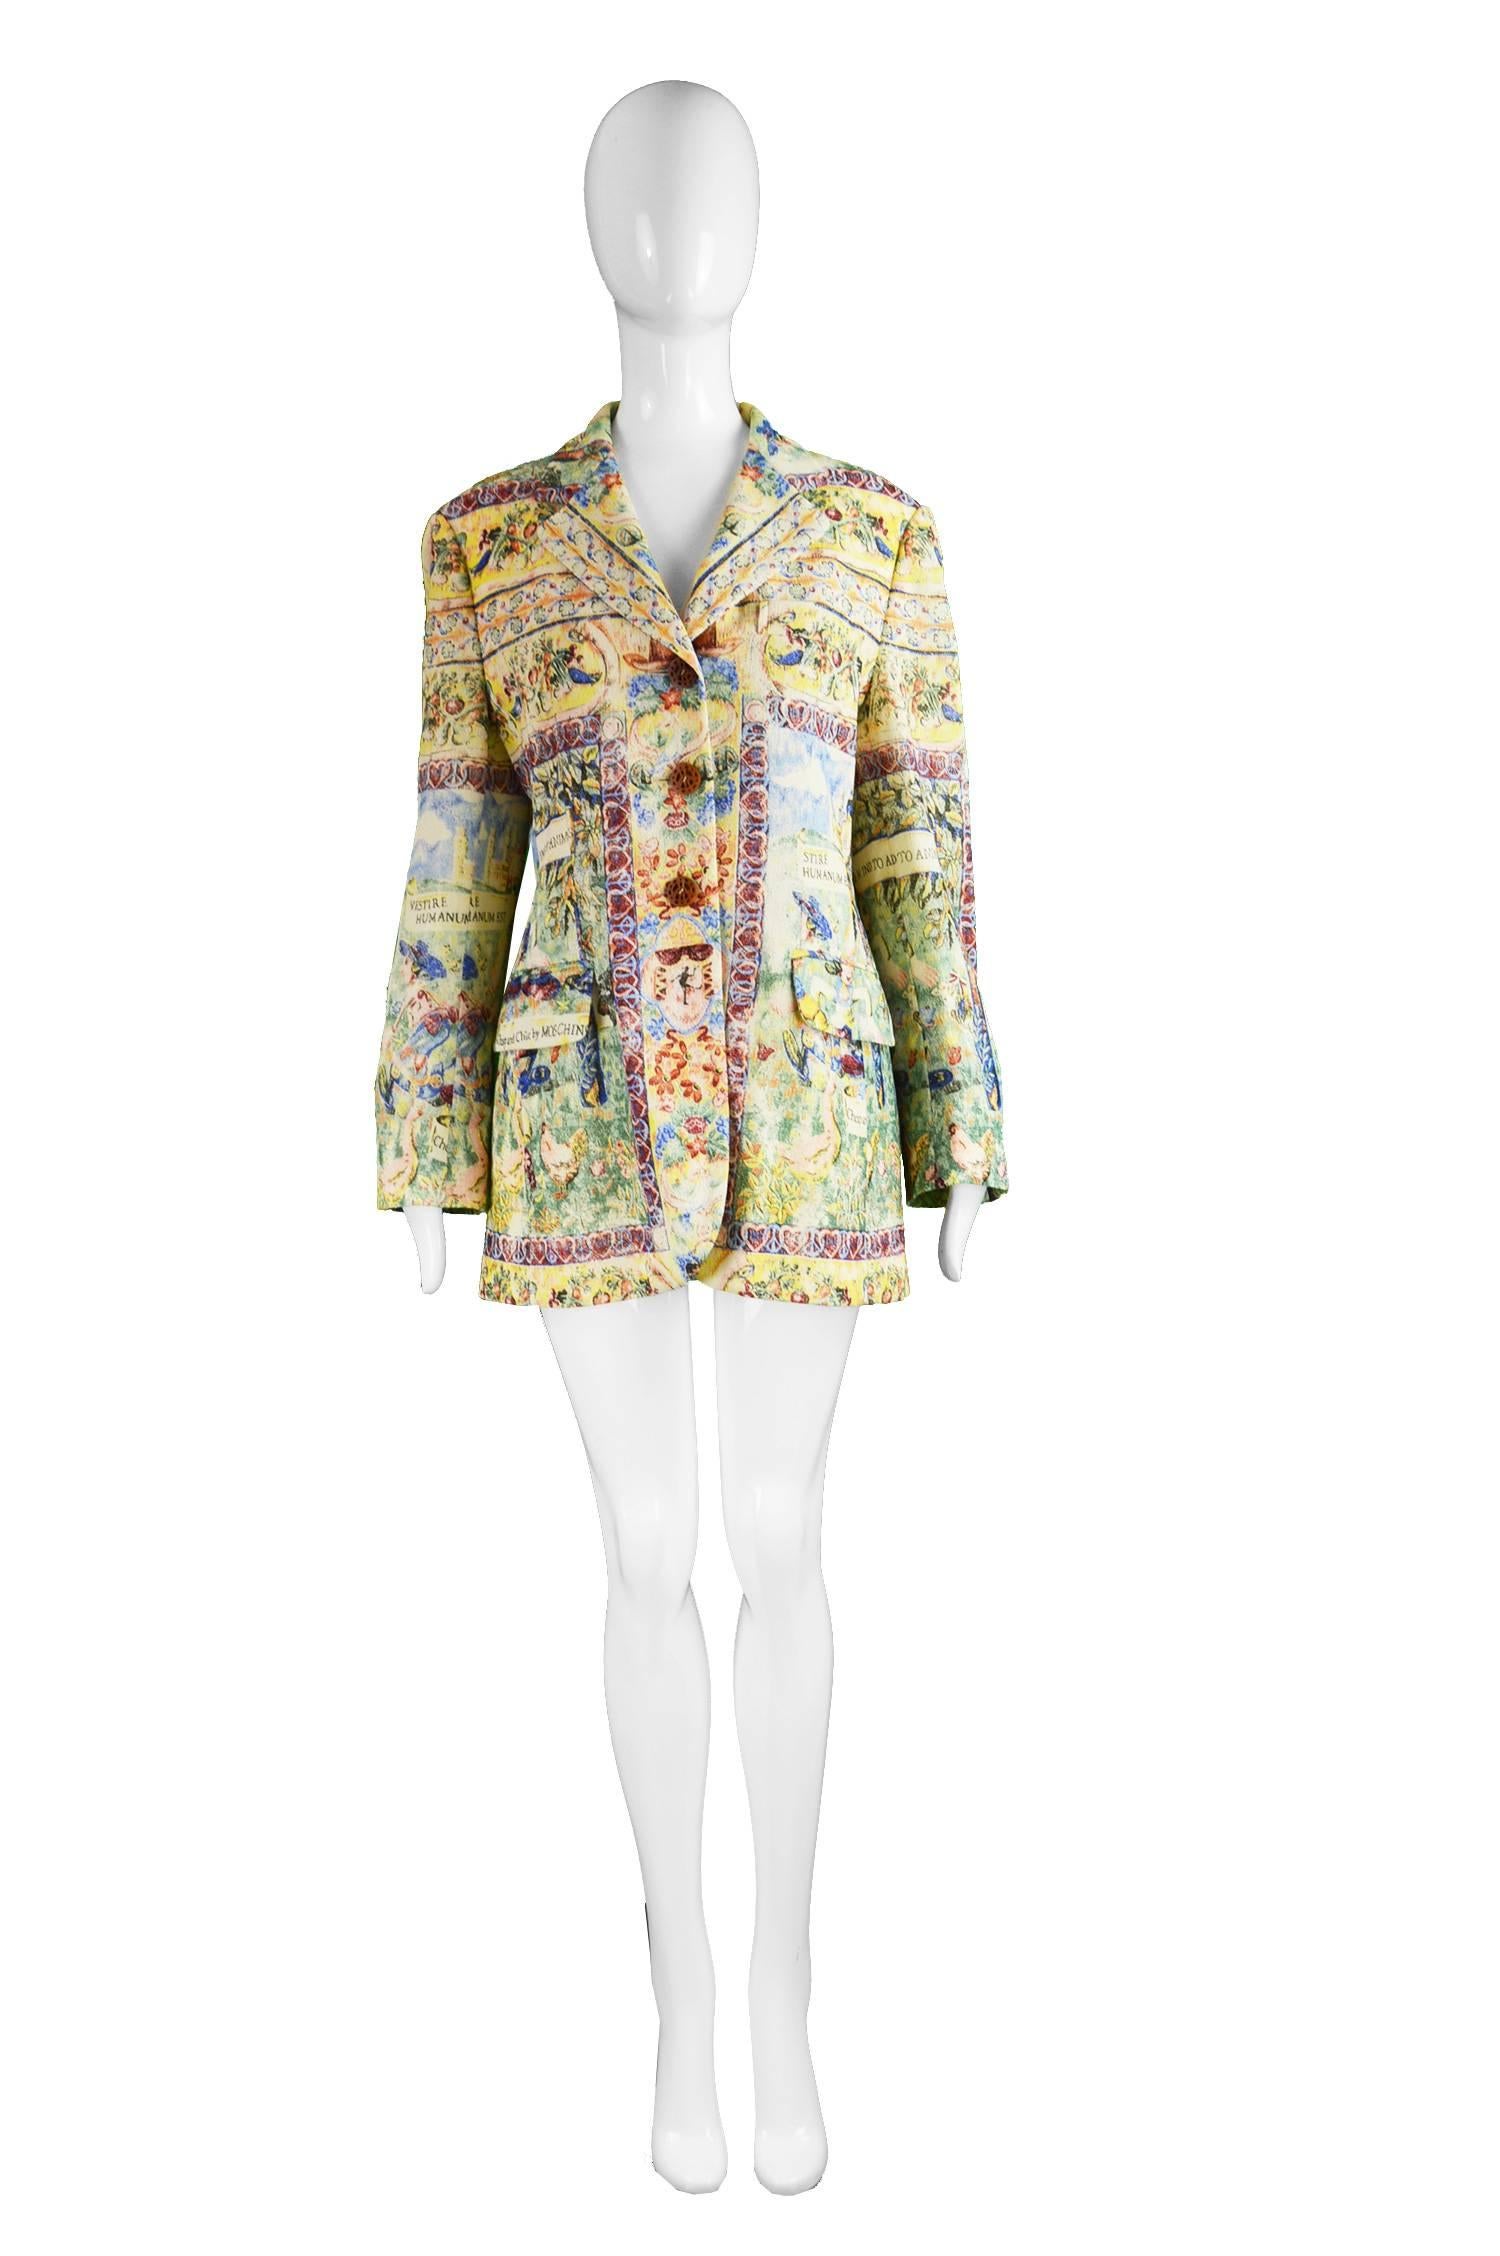 Moschino Cheap & Chic Vintage Olive Oyl & Popeye Tapestry Print Blazer, 1990s

Size: Marked GB 14 US 12 I 46 D 42 F 42.
Bust - 40” / 101cm (please allow a couple of inches room for movement)
Waist - 38” / 96cm
Length (Shoulder to Hem) - 29”